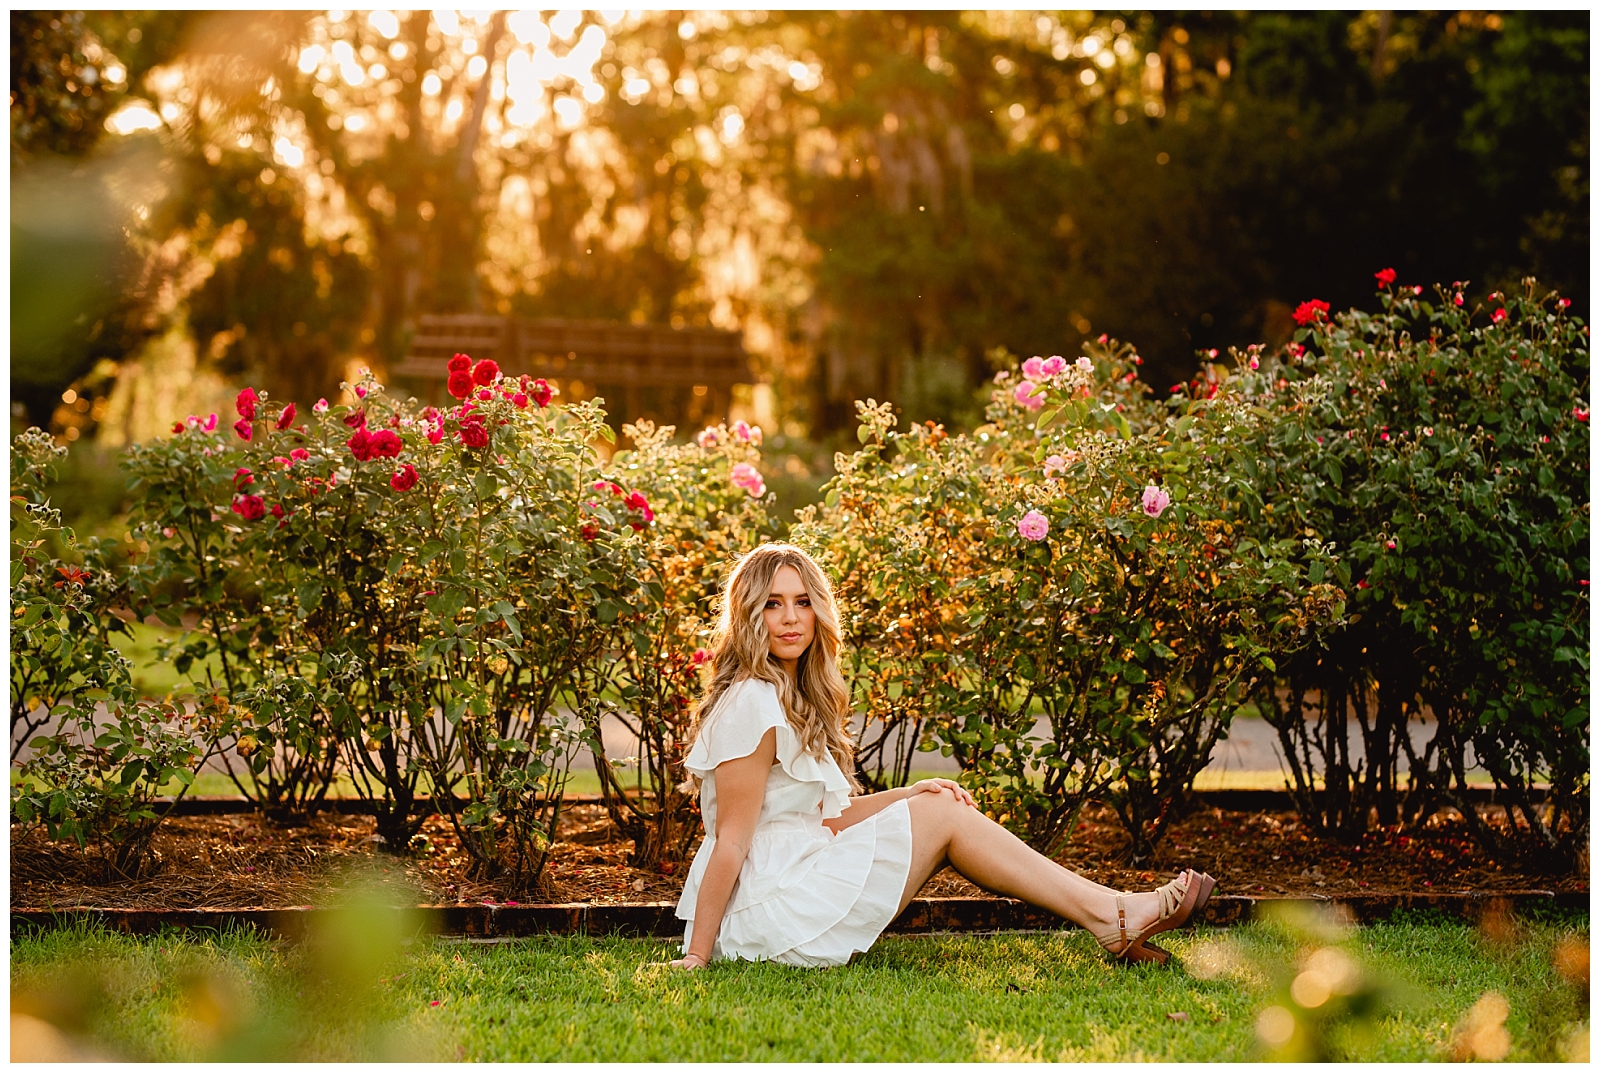 Thomasville rose garden, girl in white dress at sunset in the garden. Shelly Williams Photography.